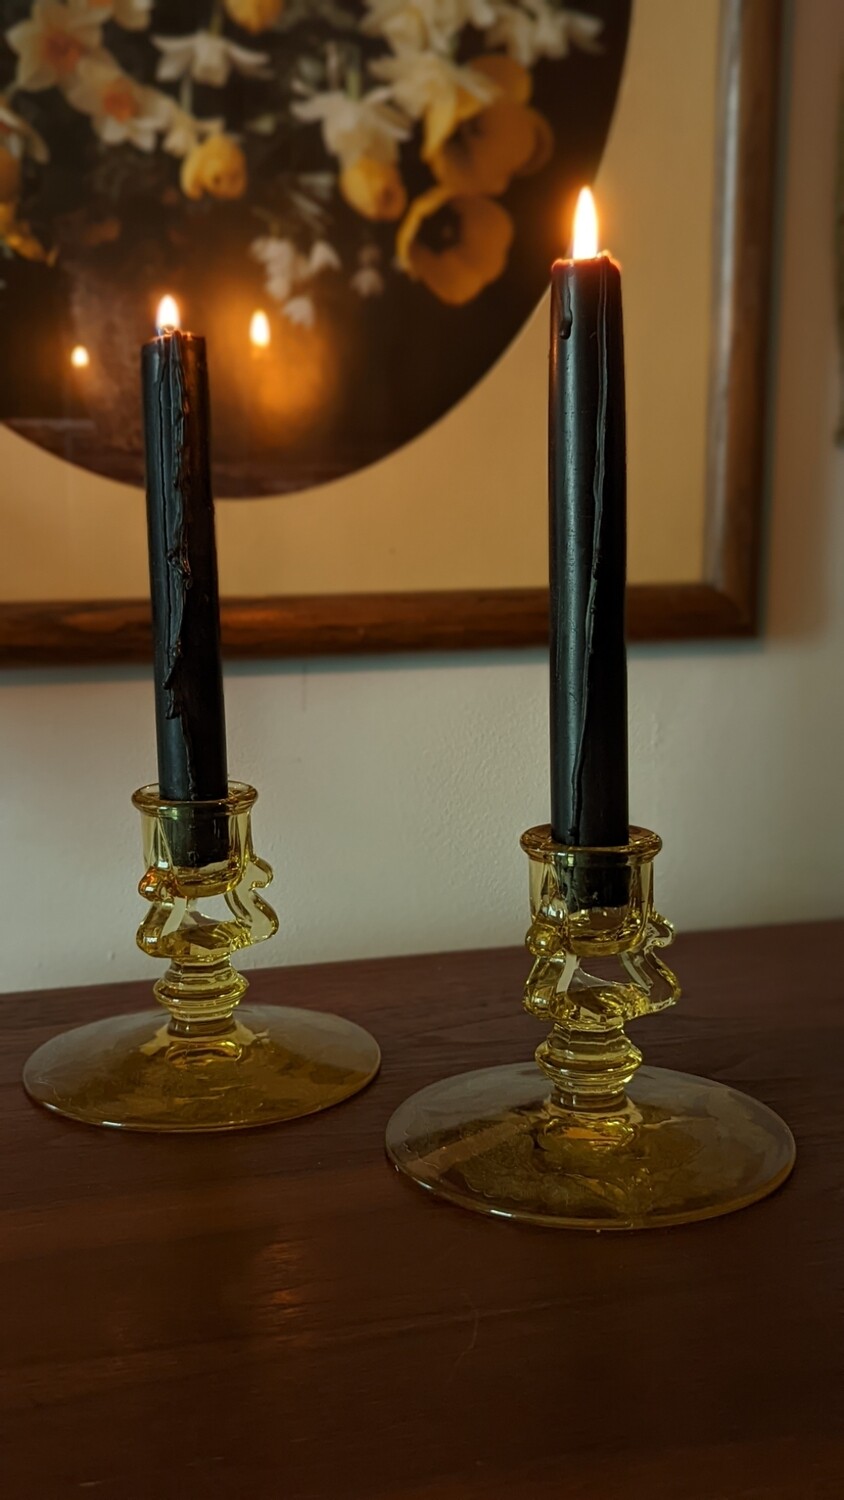 jeanette's candle holders